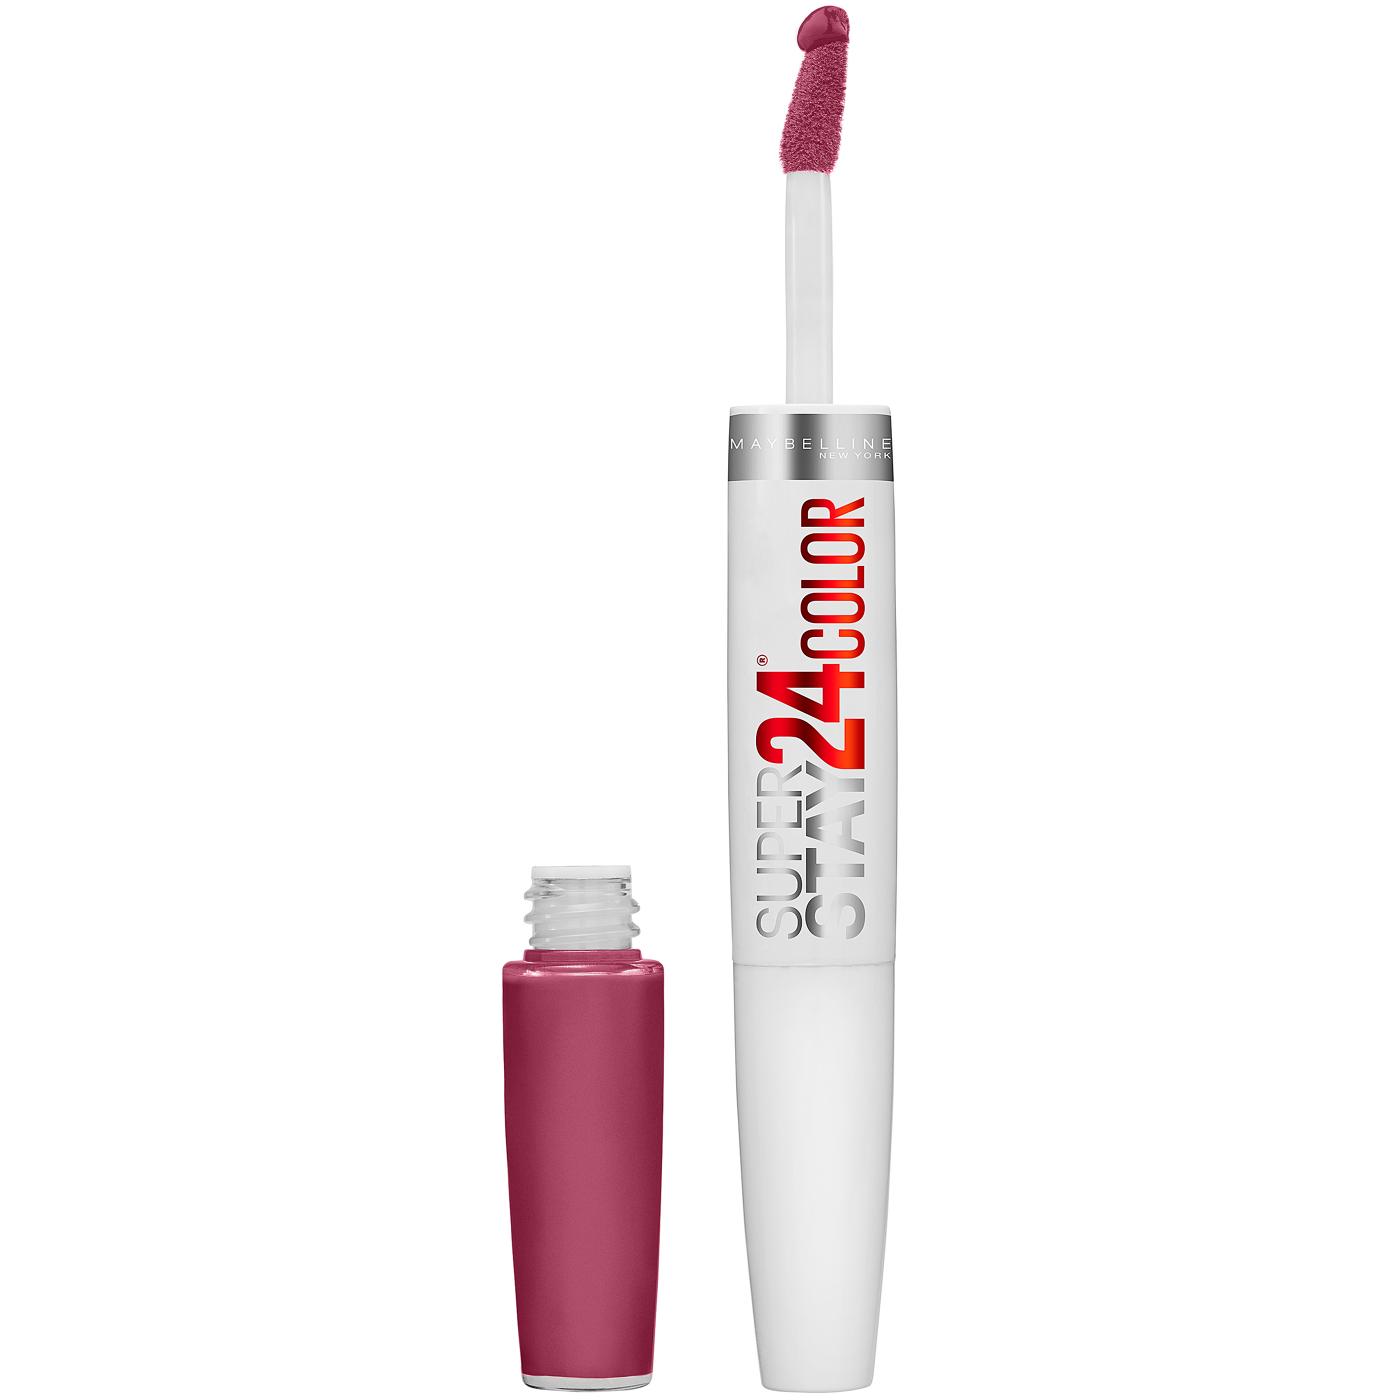 Maybelline Super Stay 24 2-Step Liquid Lipstick - Relentless Ruby; image 1 of 3